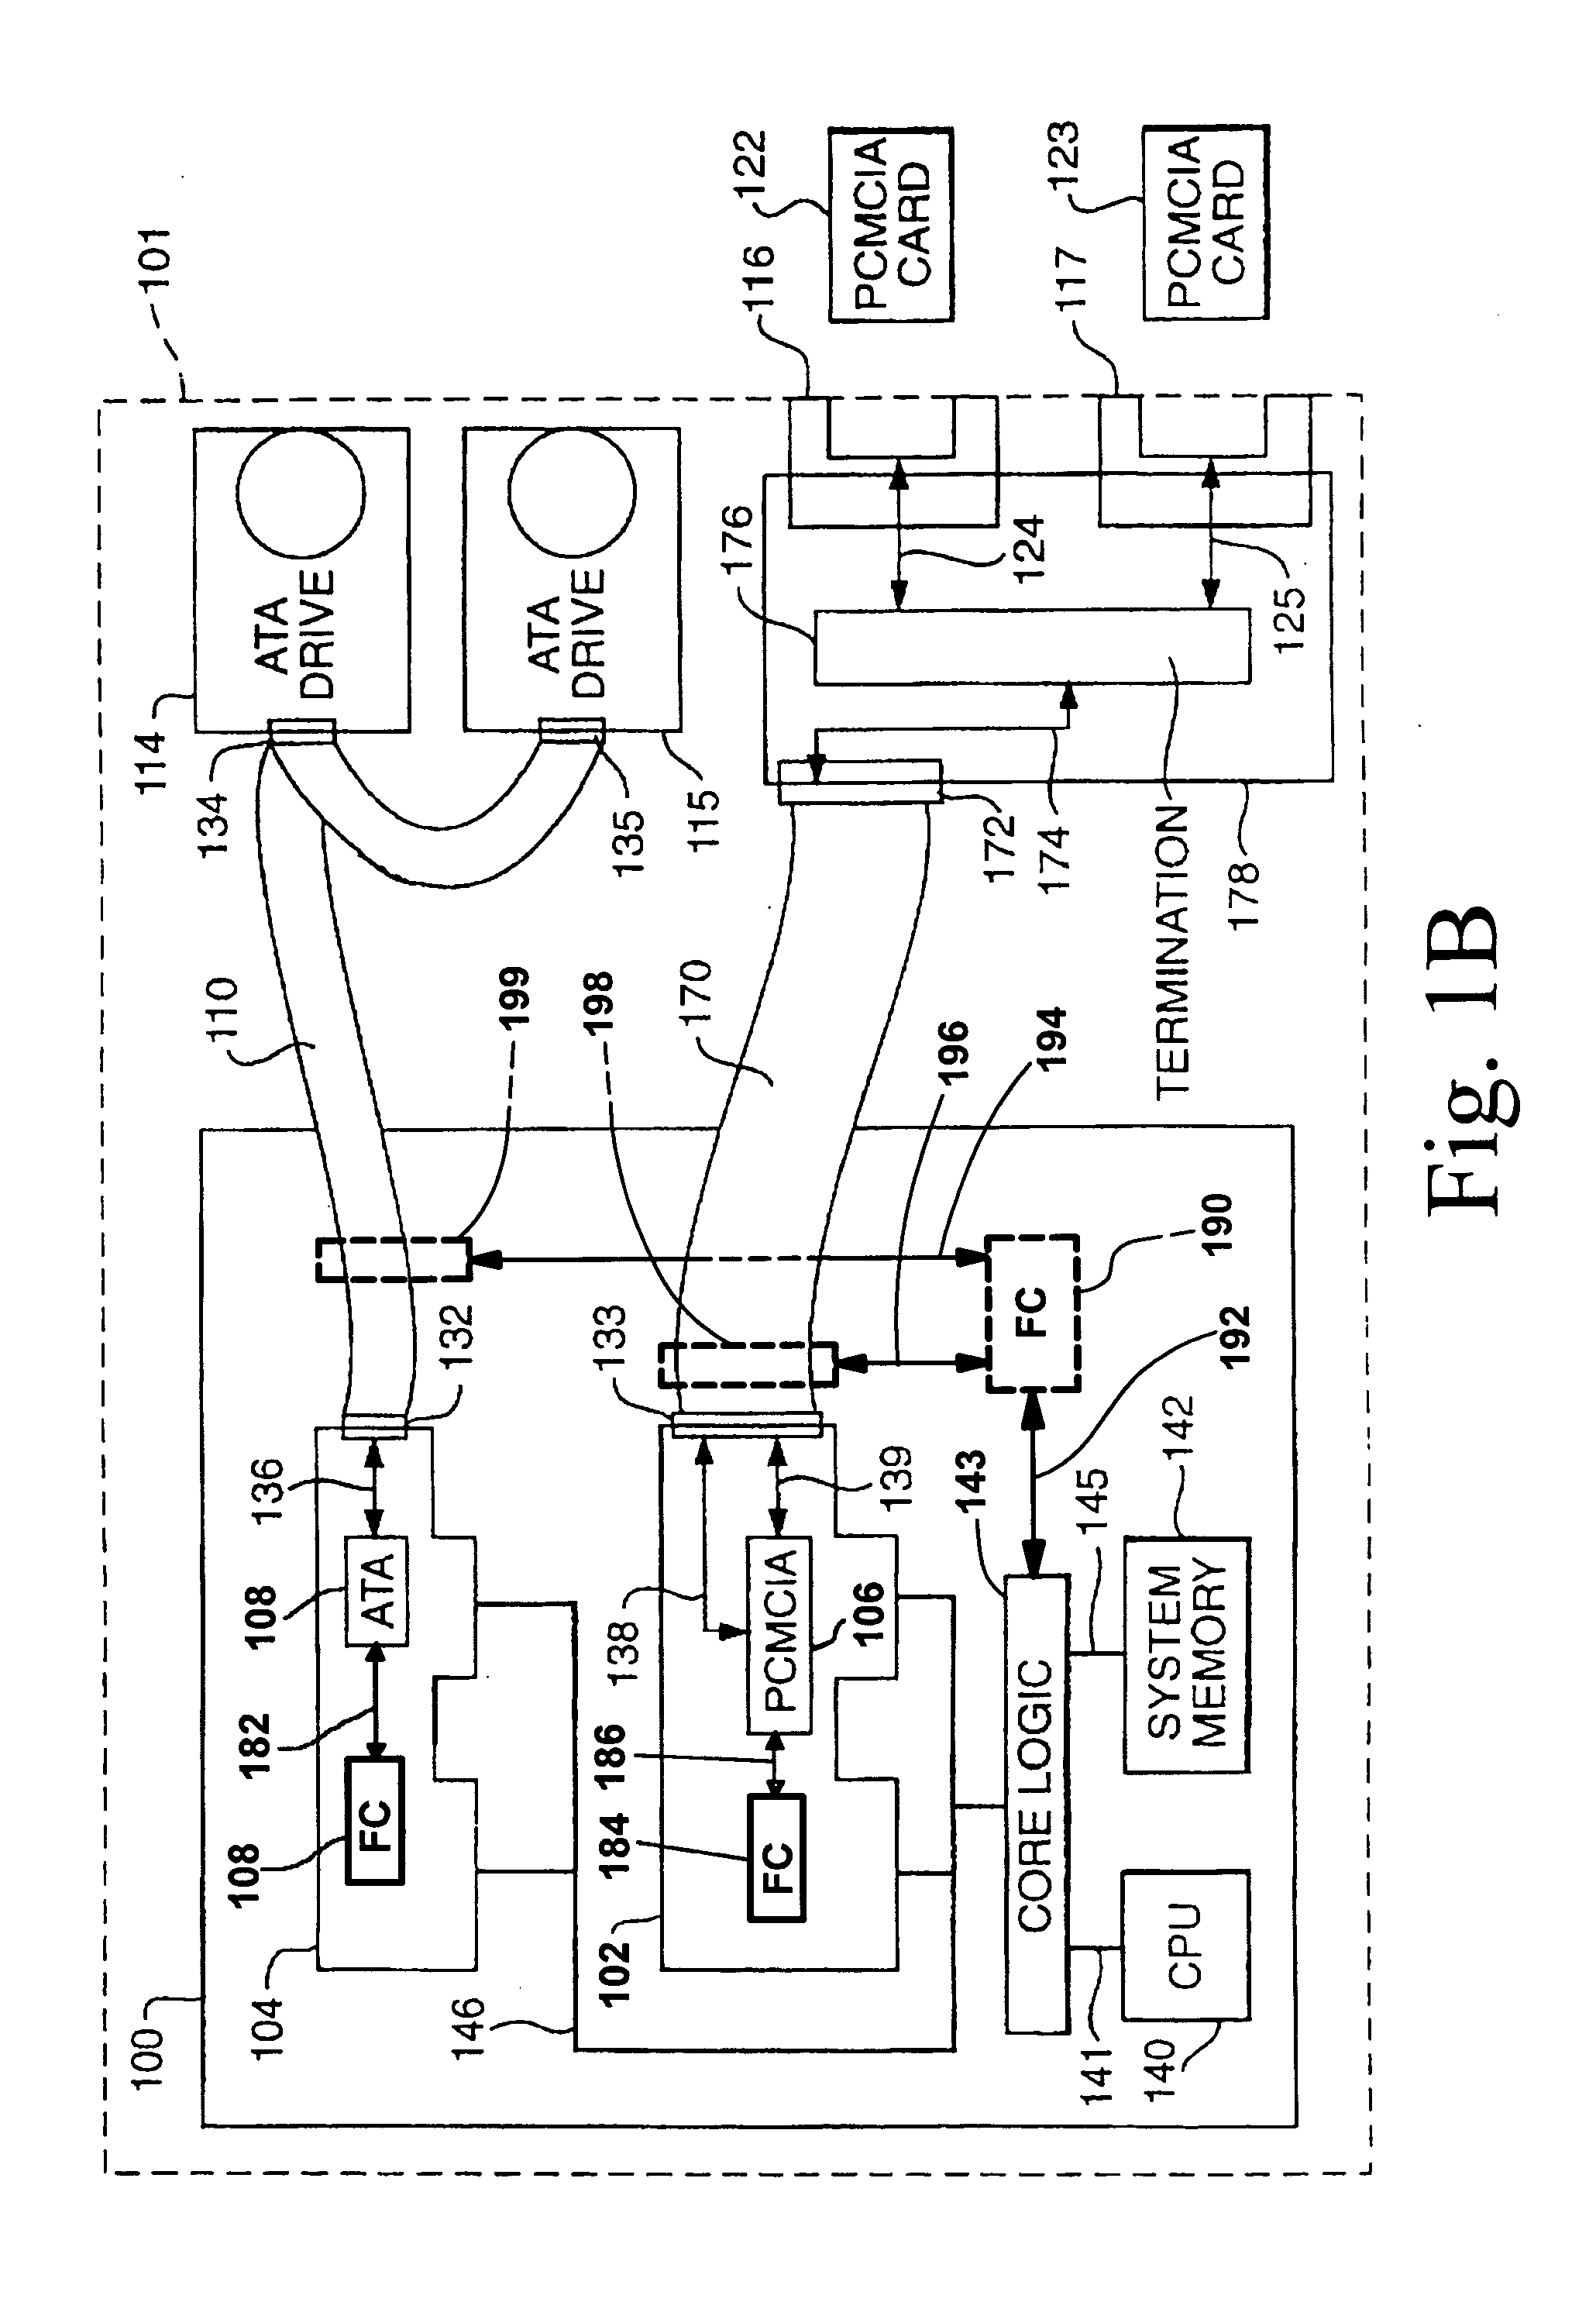 Dynamic associative storage security for long-term memory storage devices